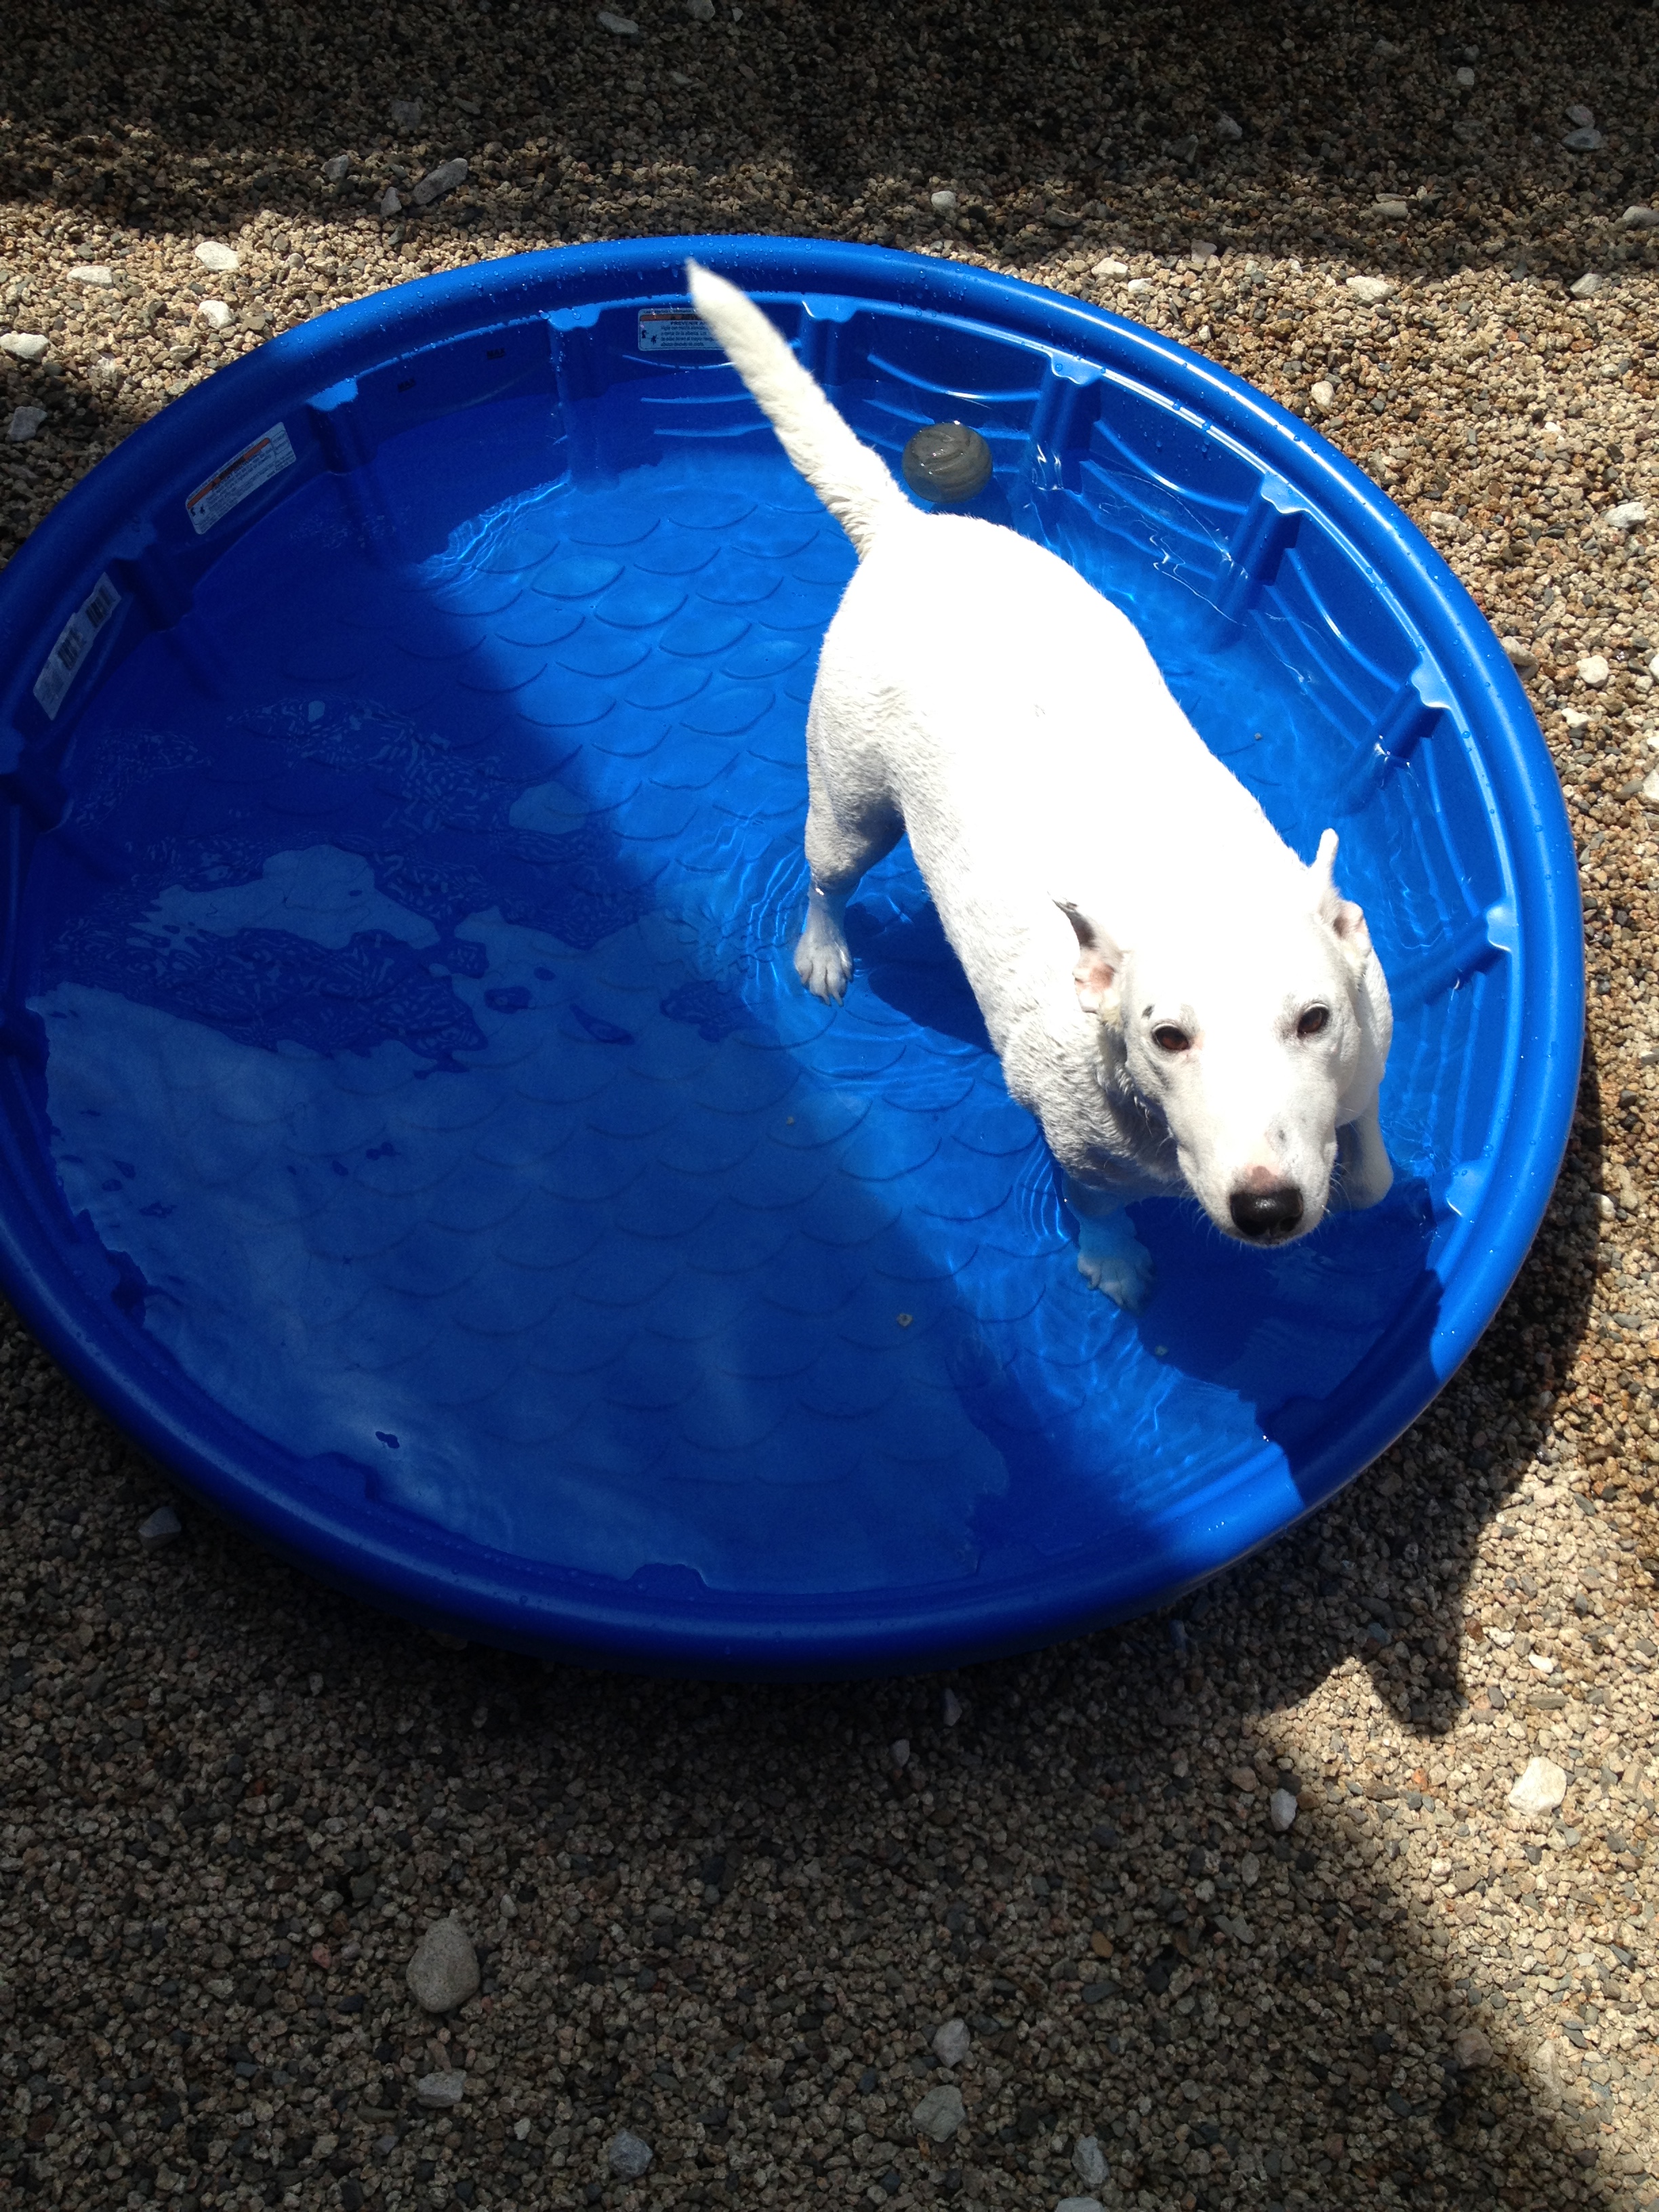 Water time - Boarding VCA College Park - Ana Brook Animal Hospital Cypress (714)576-2069